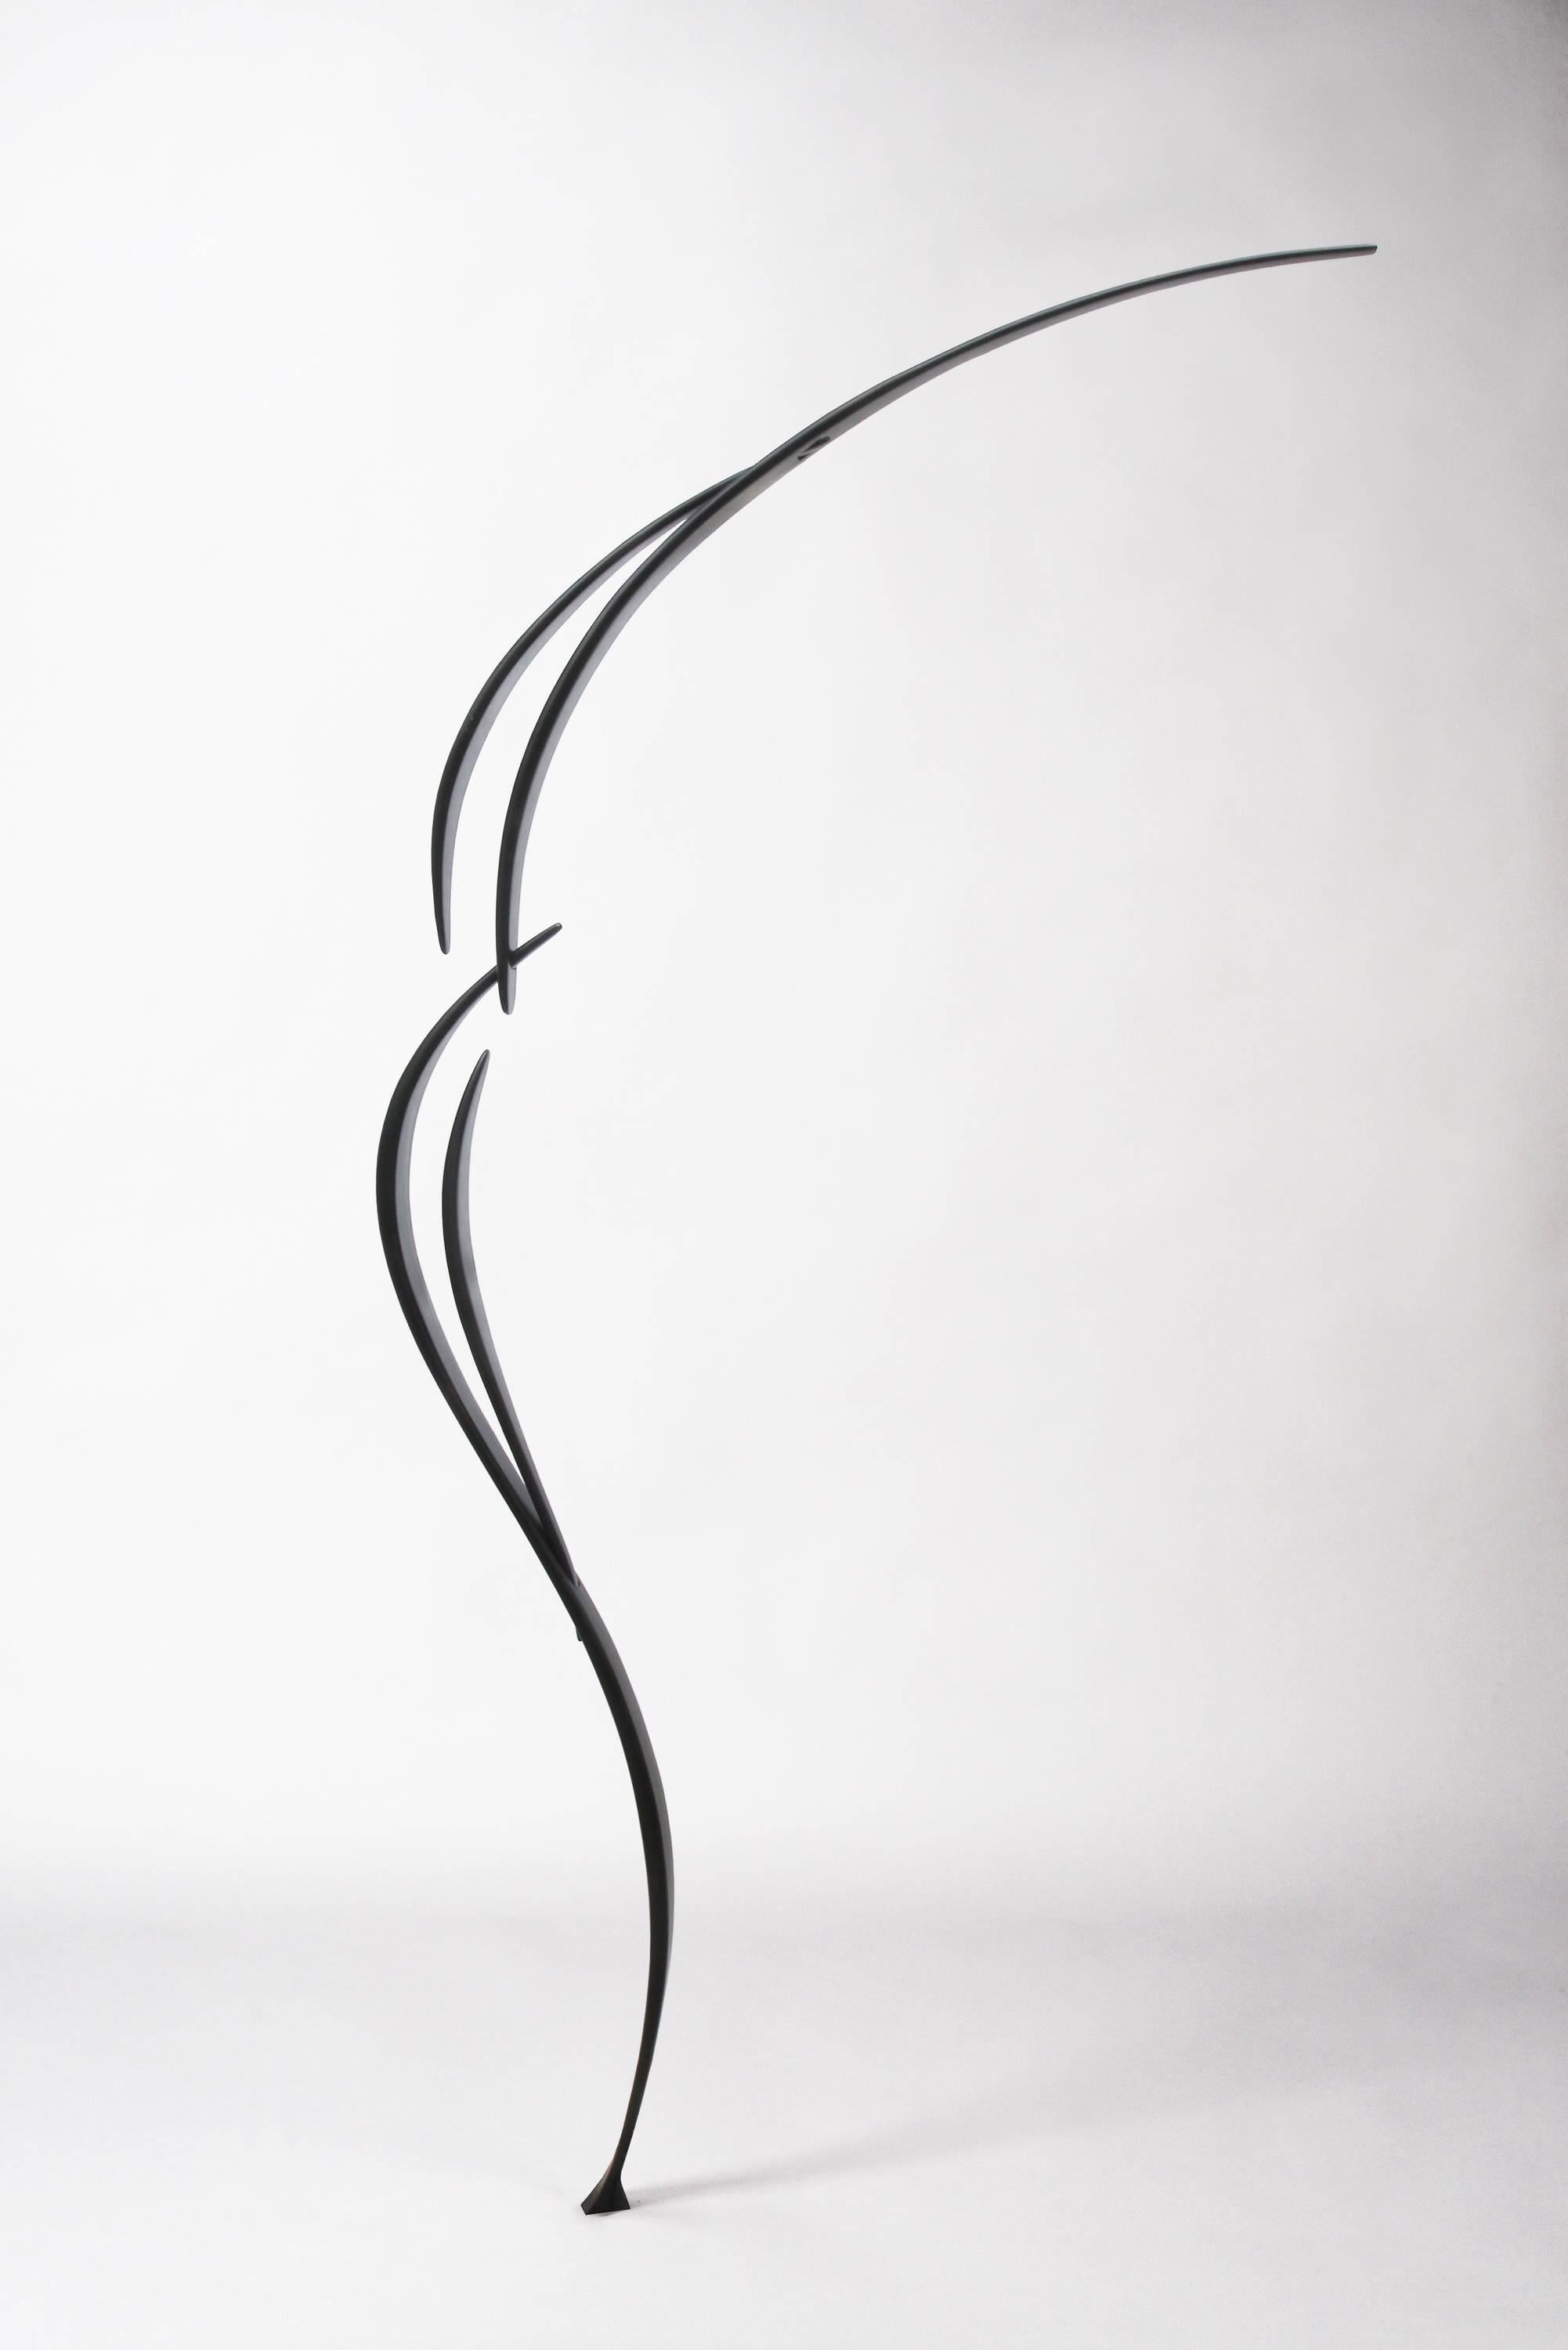 Will Clift Abstract Sculpture - Reaching Up and Over